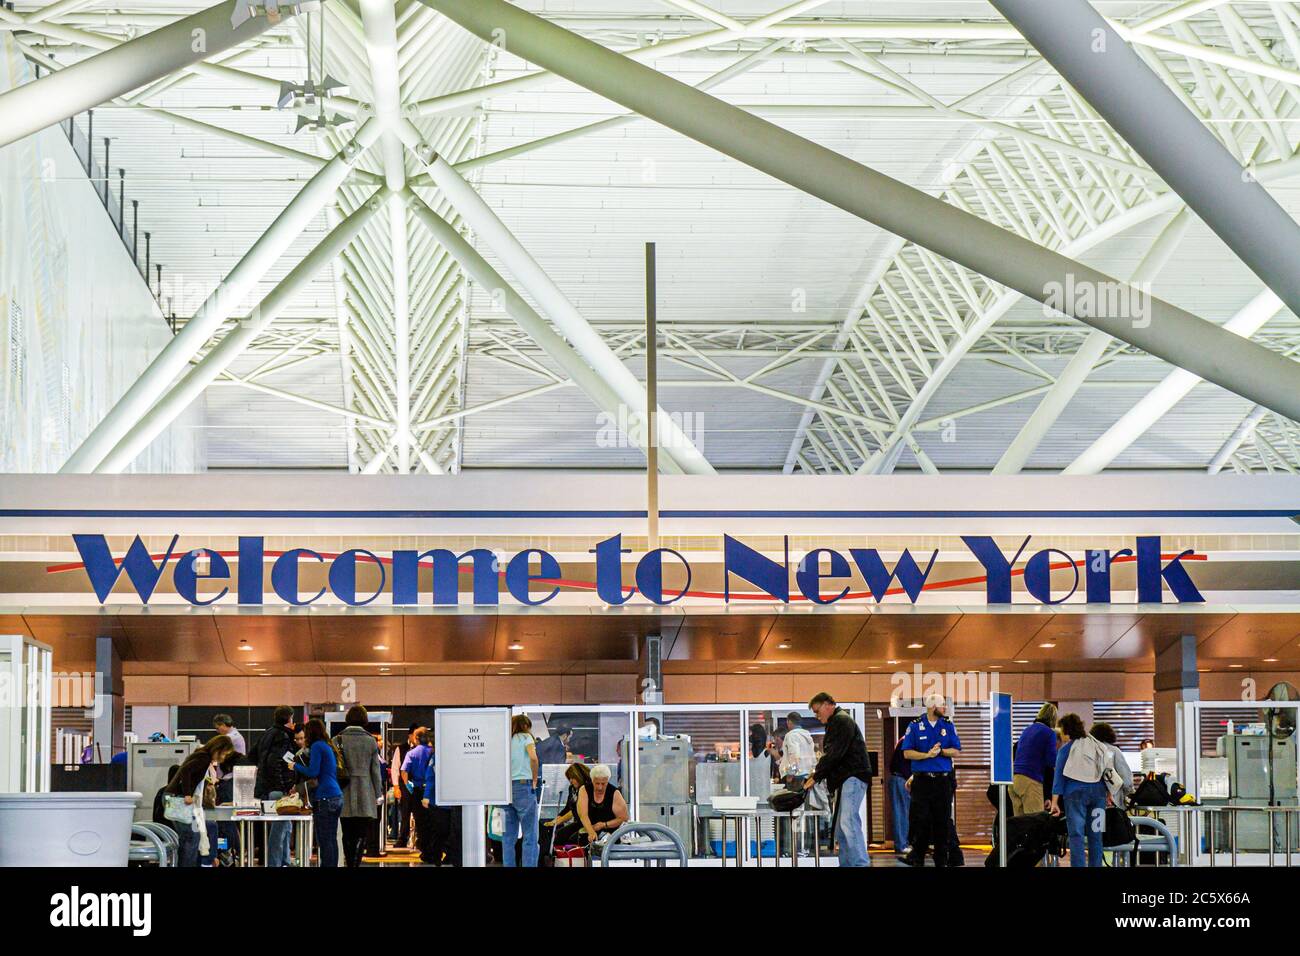 New York City,NYC NY Brooklyn,John F. Kennedy International Airport,JFK,American Airlines,welcome,sign,terminal,structure beam,homeland security,check Stock Photo